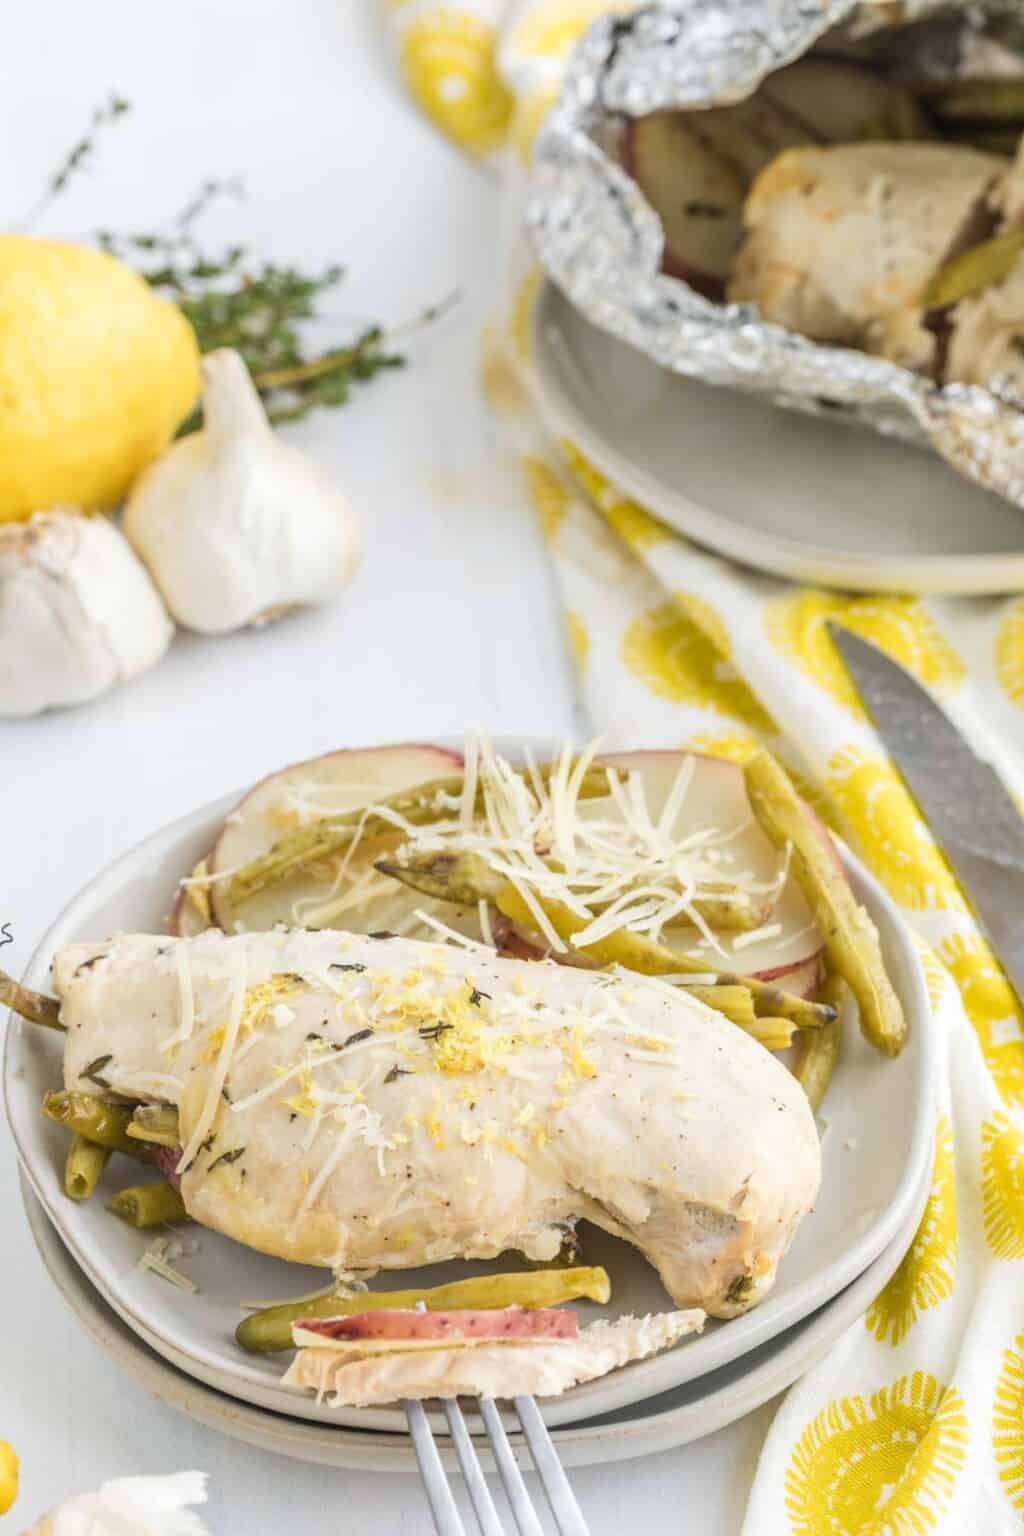 Lemon Chicken Foil Packets | Quick and Easy Dinner Idea!